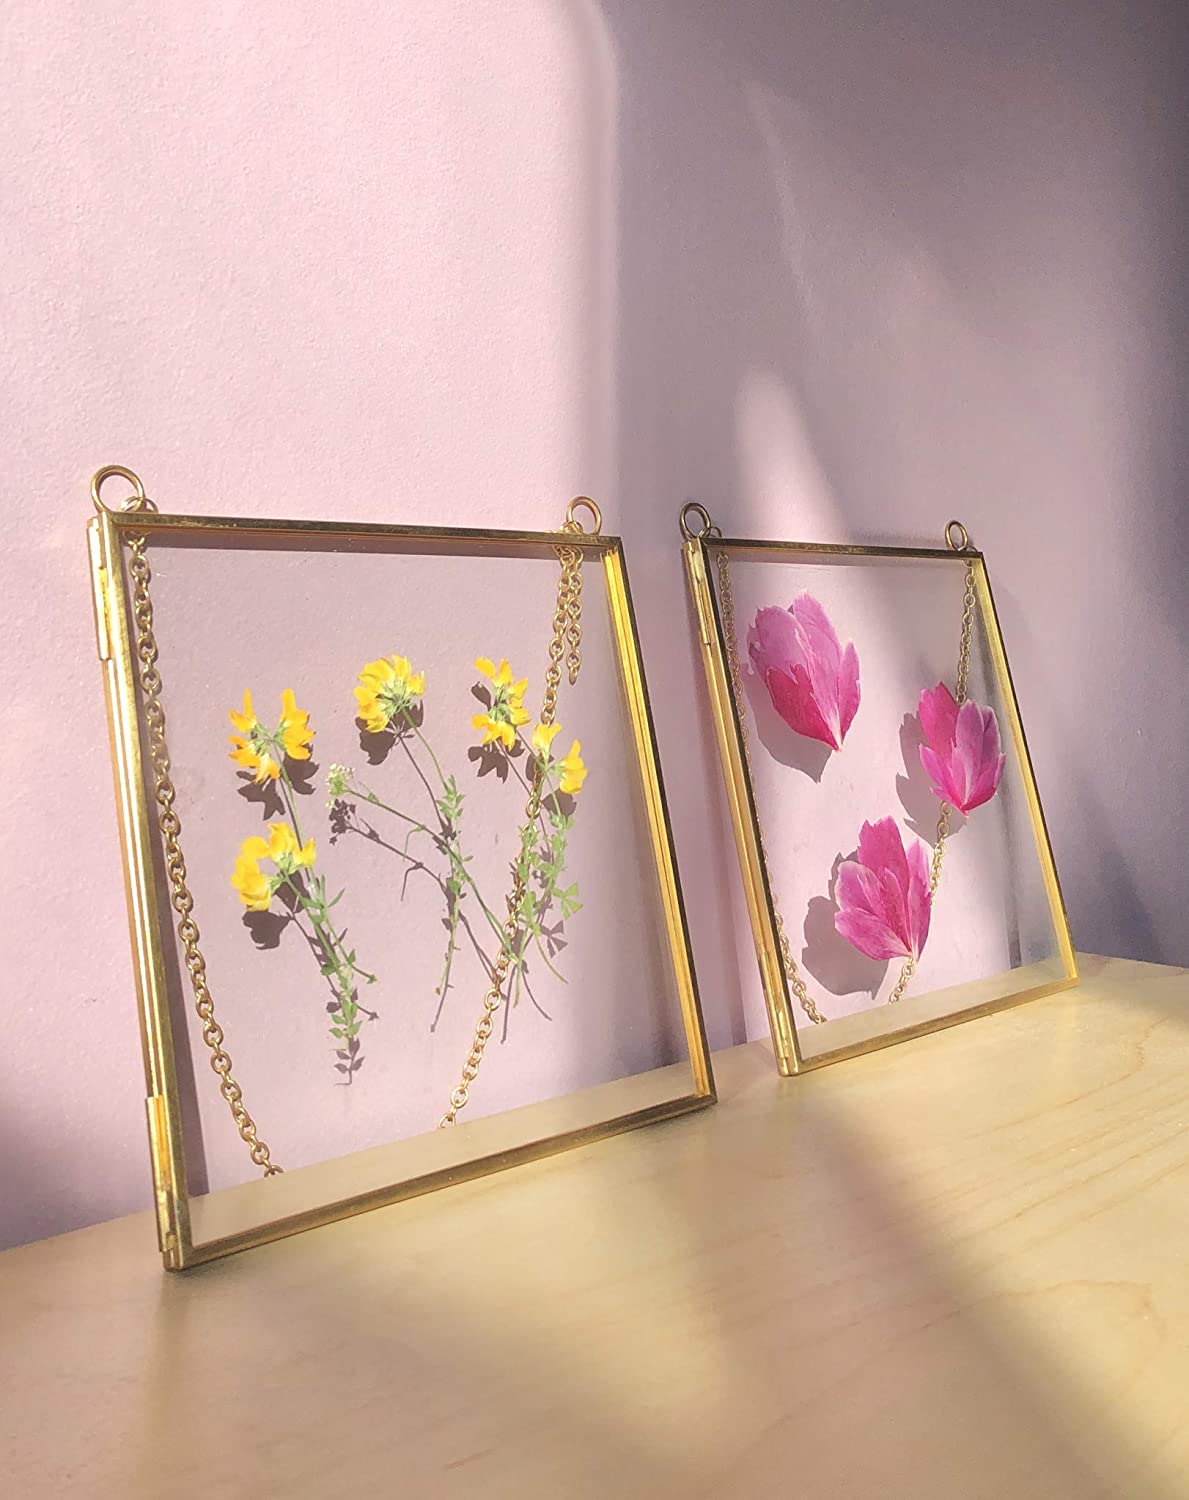  Beedecor Double Glass Frame for Pressed Flowers, Leaf